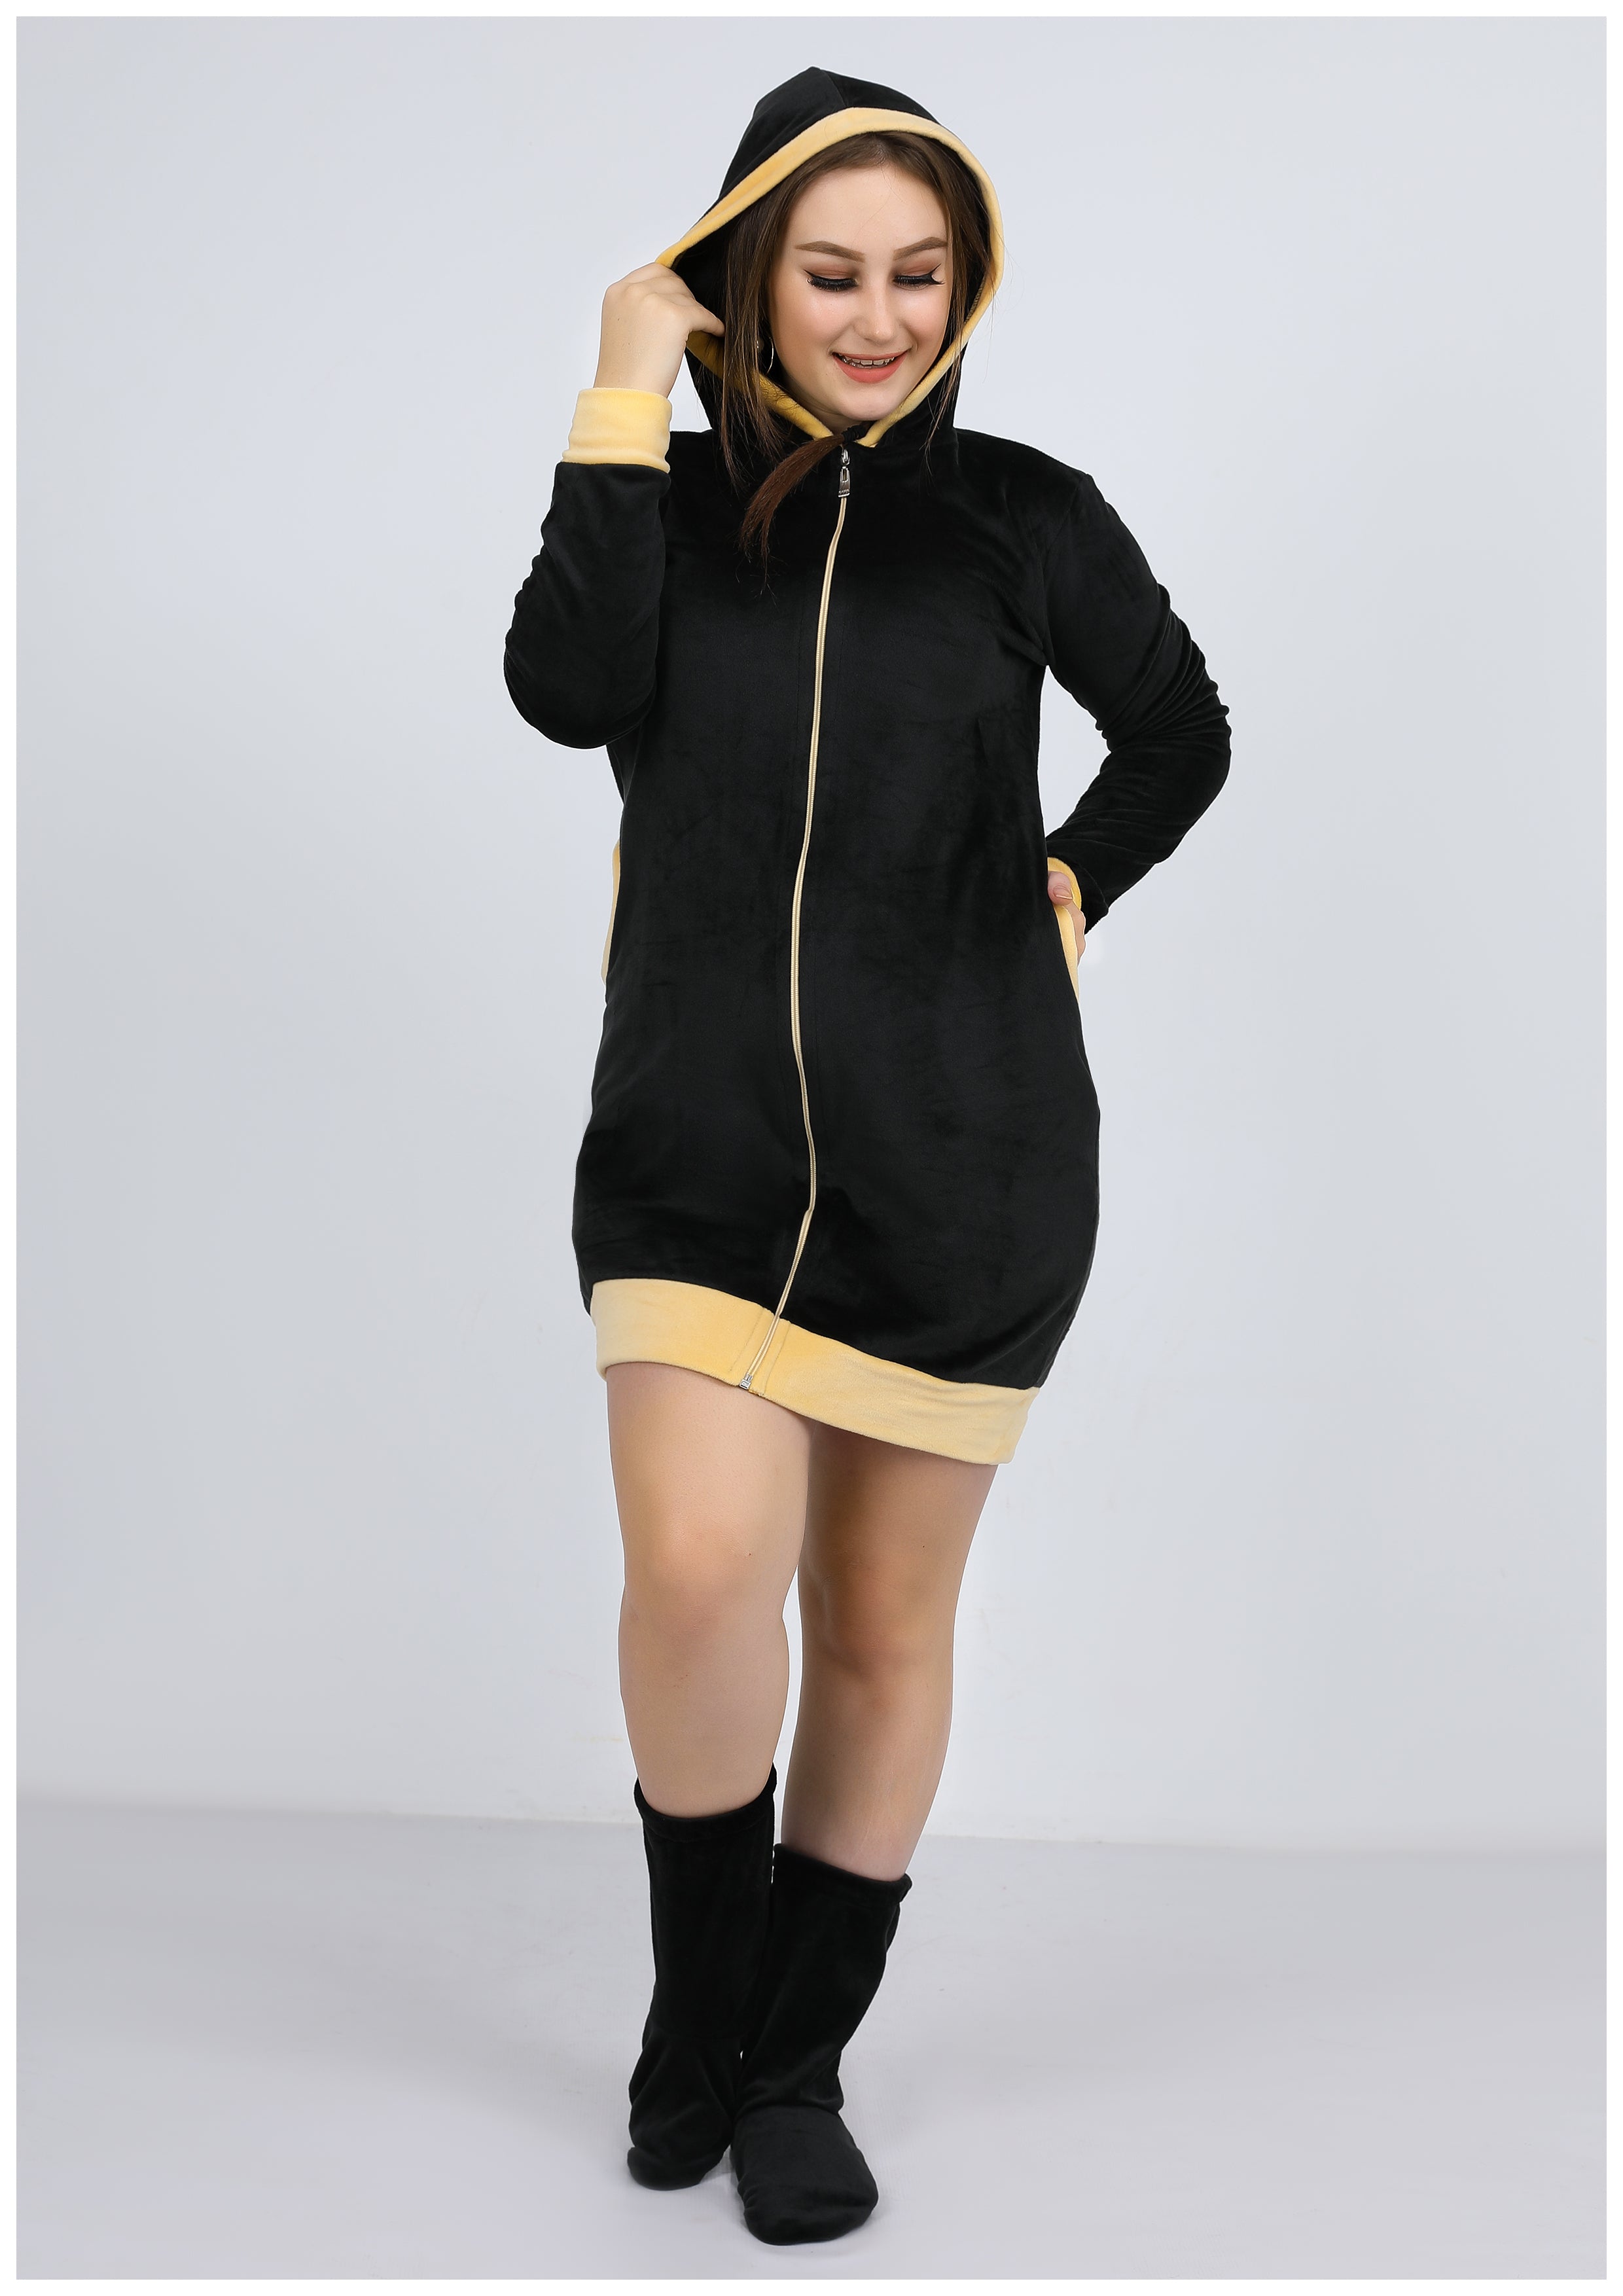 Black and yellow short Heidi dress with lining on both sides, hood and zipper